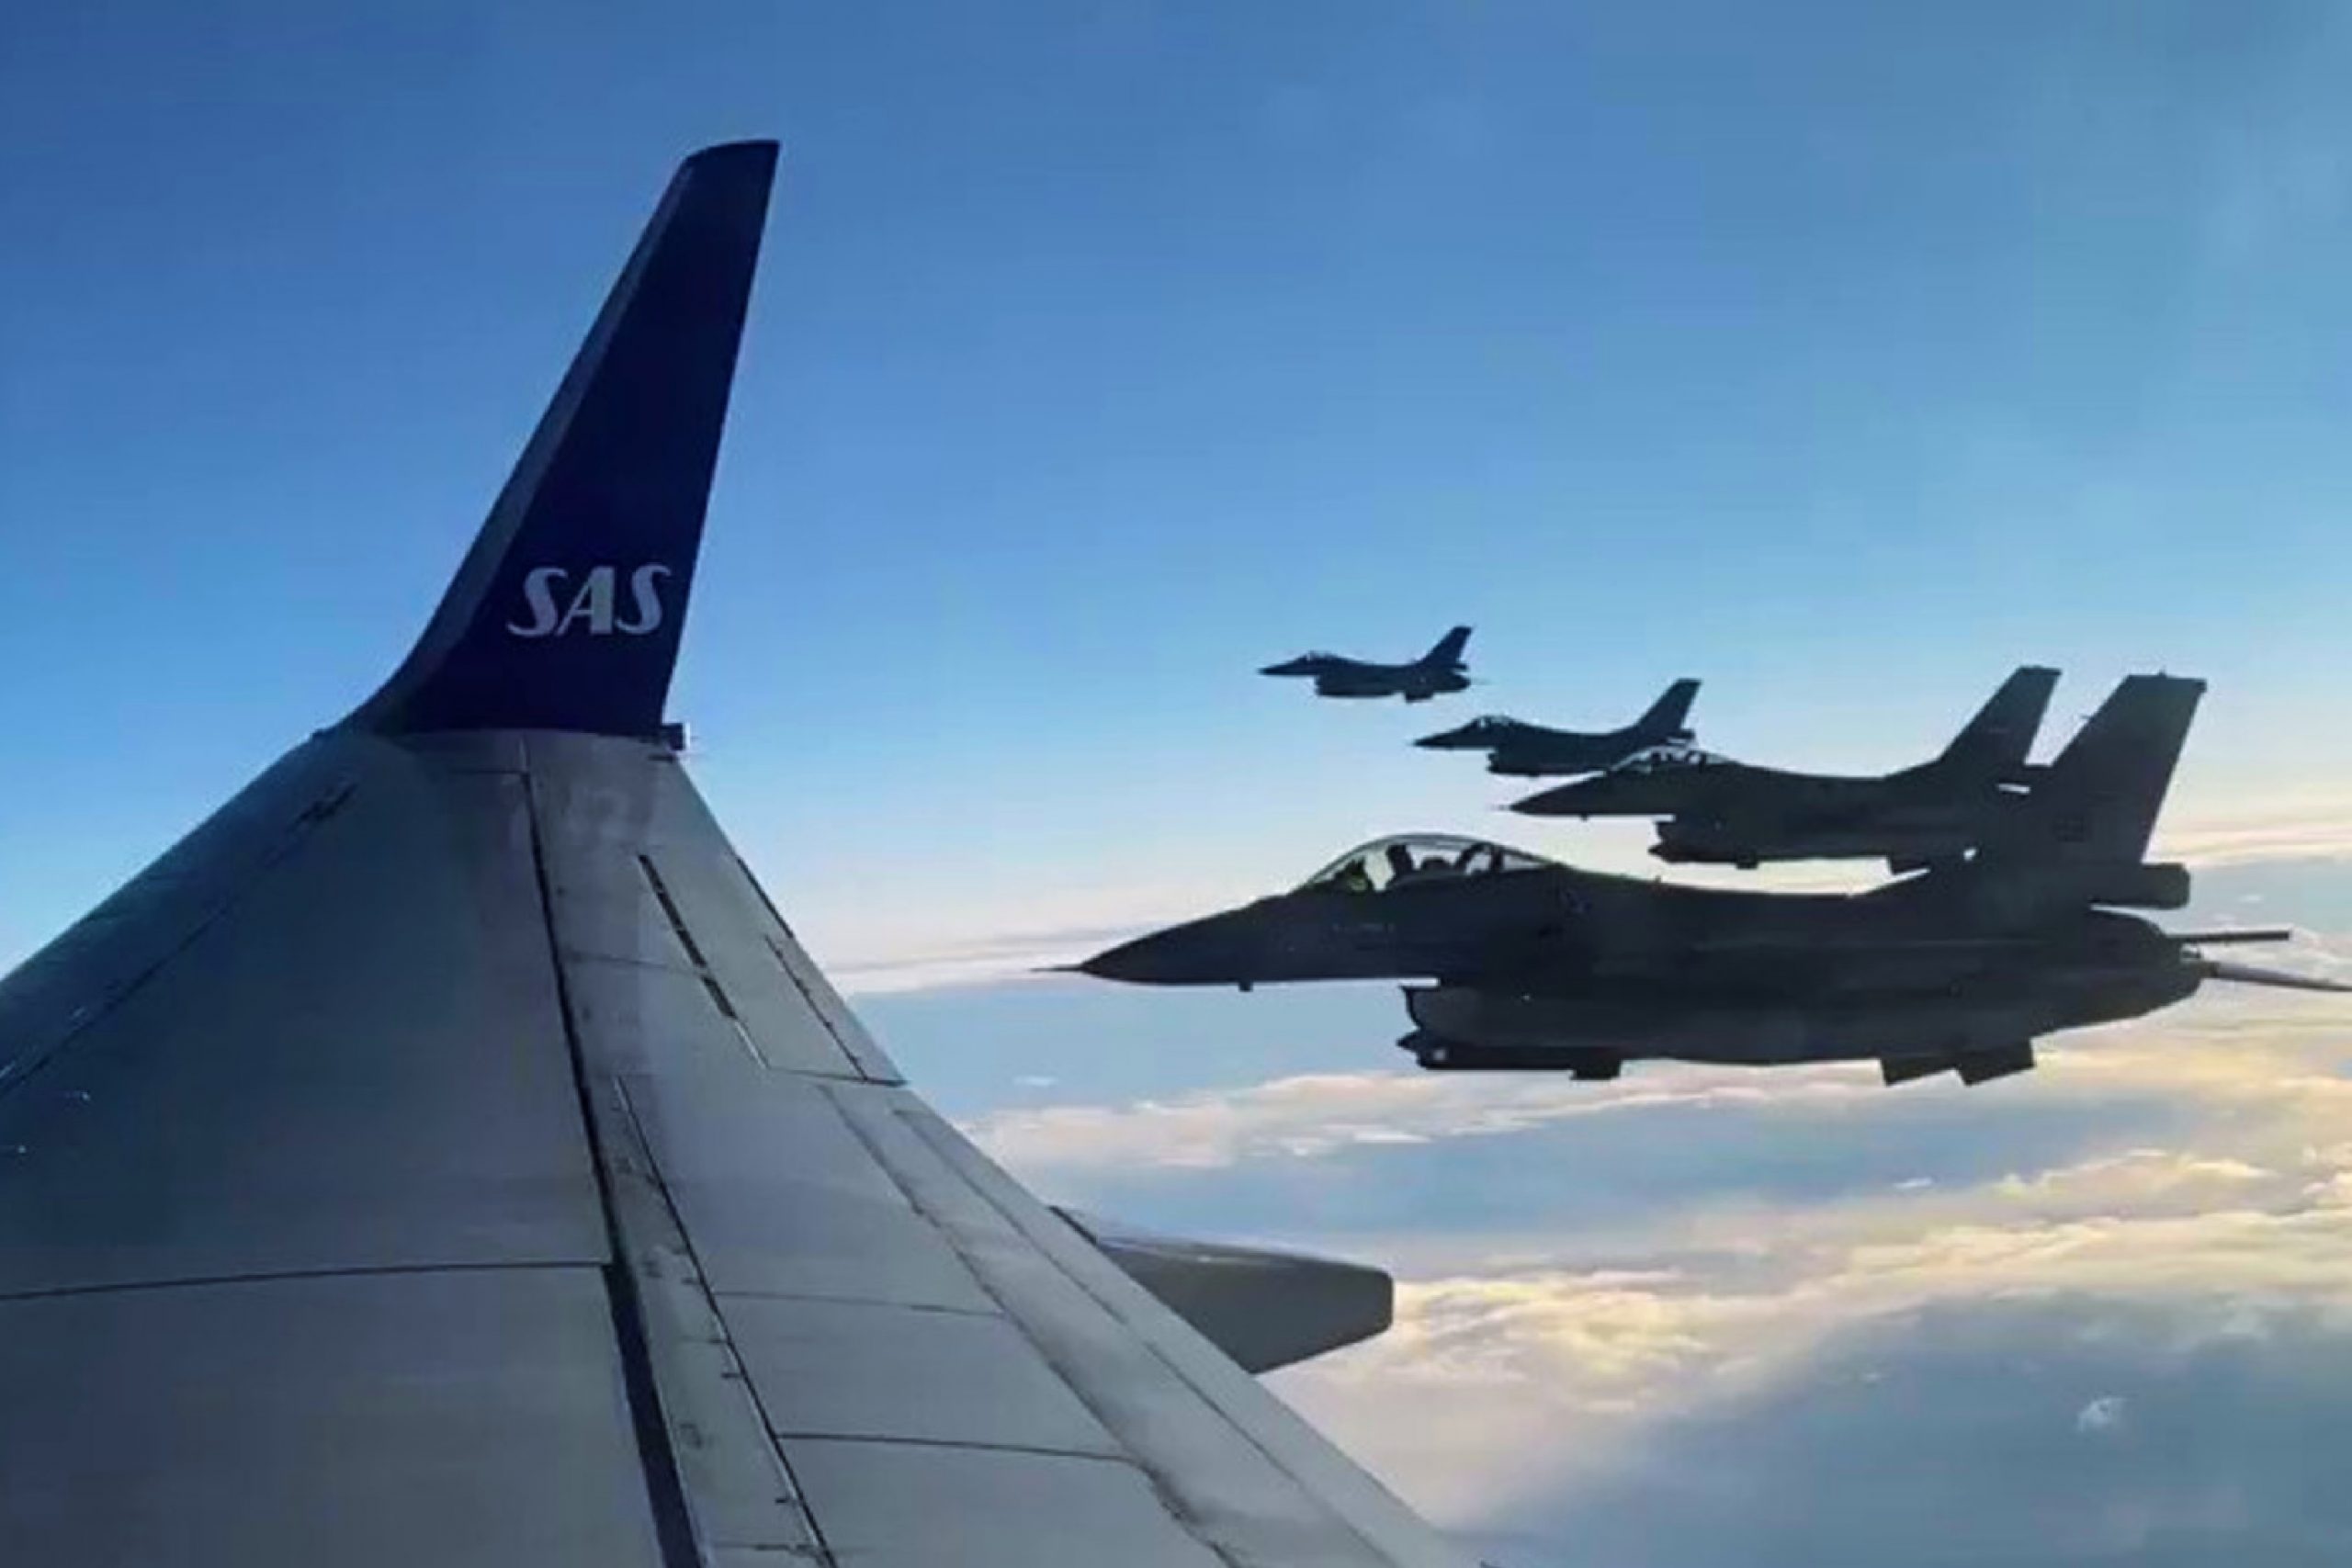 Norwegian champions Bodo/Glimt escorted by F-16s on their way home after winning the title